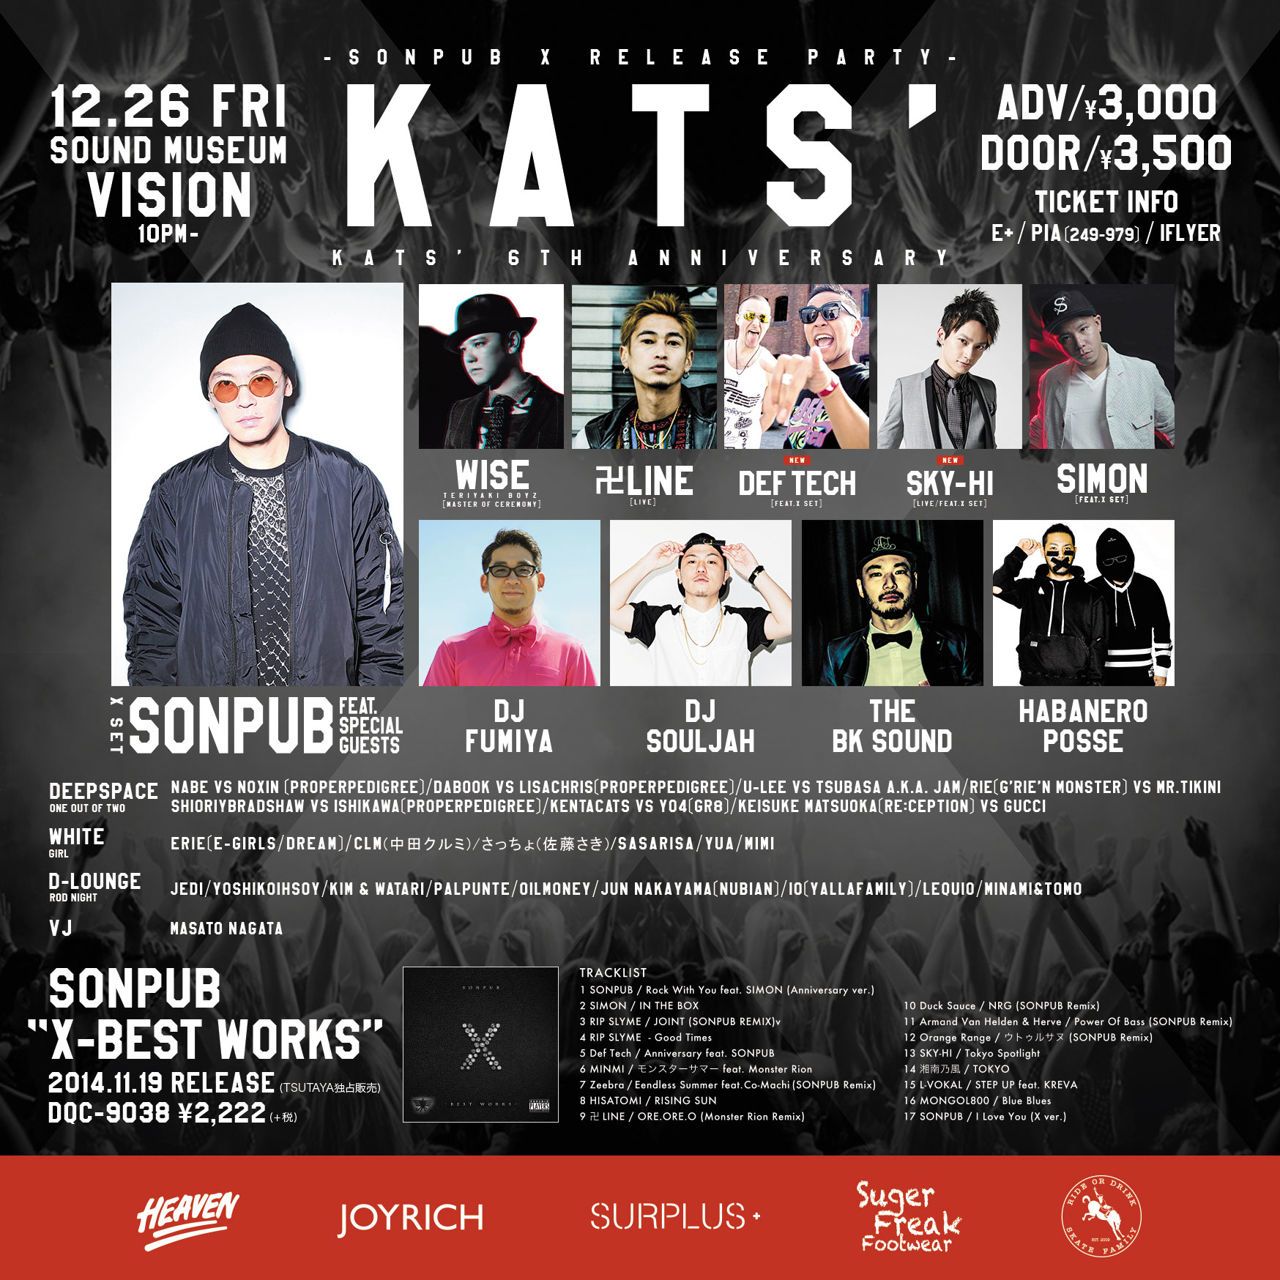 KATS 6th ANNIVERSARY. ~ SONPUB X - BEST WORKS - RELEASE PARTY ~